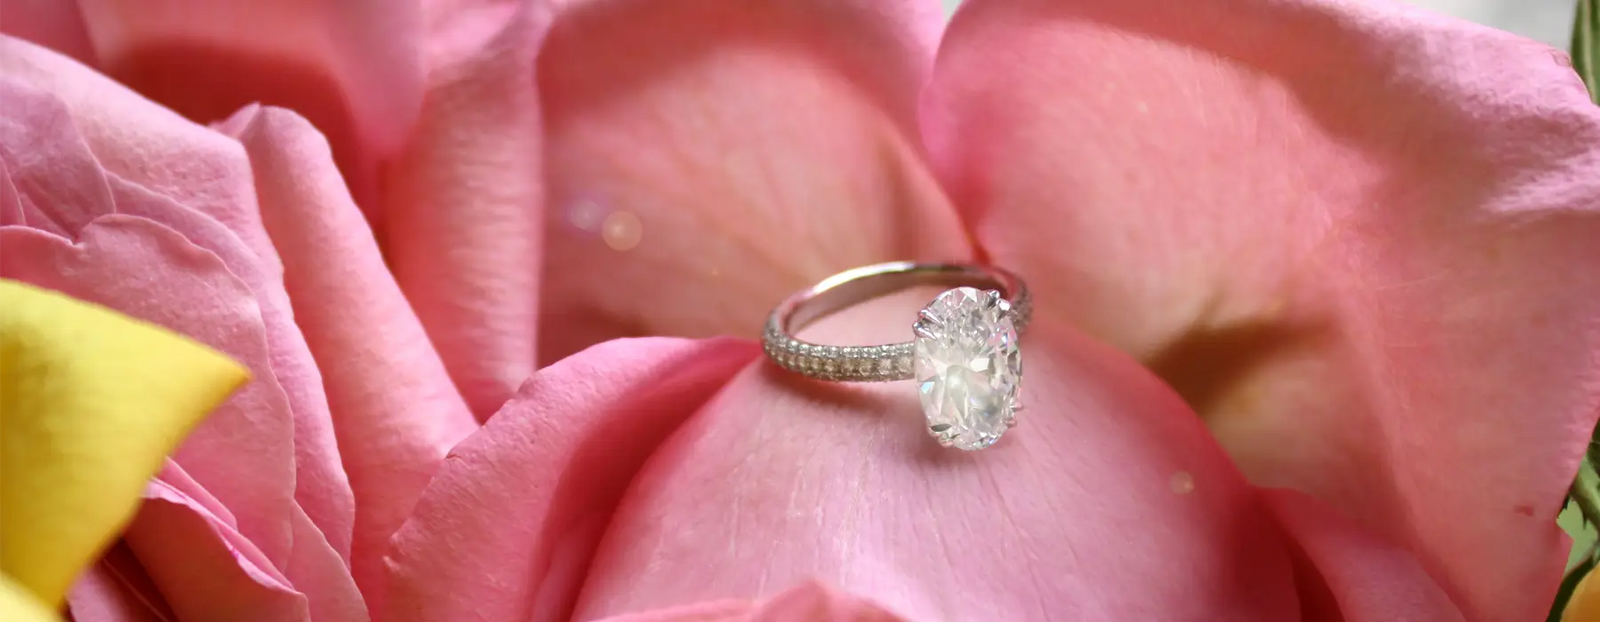 guide to help choose diamond engagement ring styles at Quorri Canada